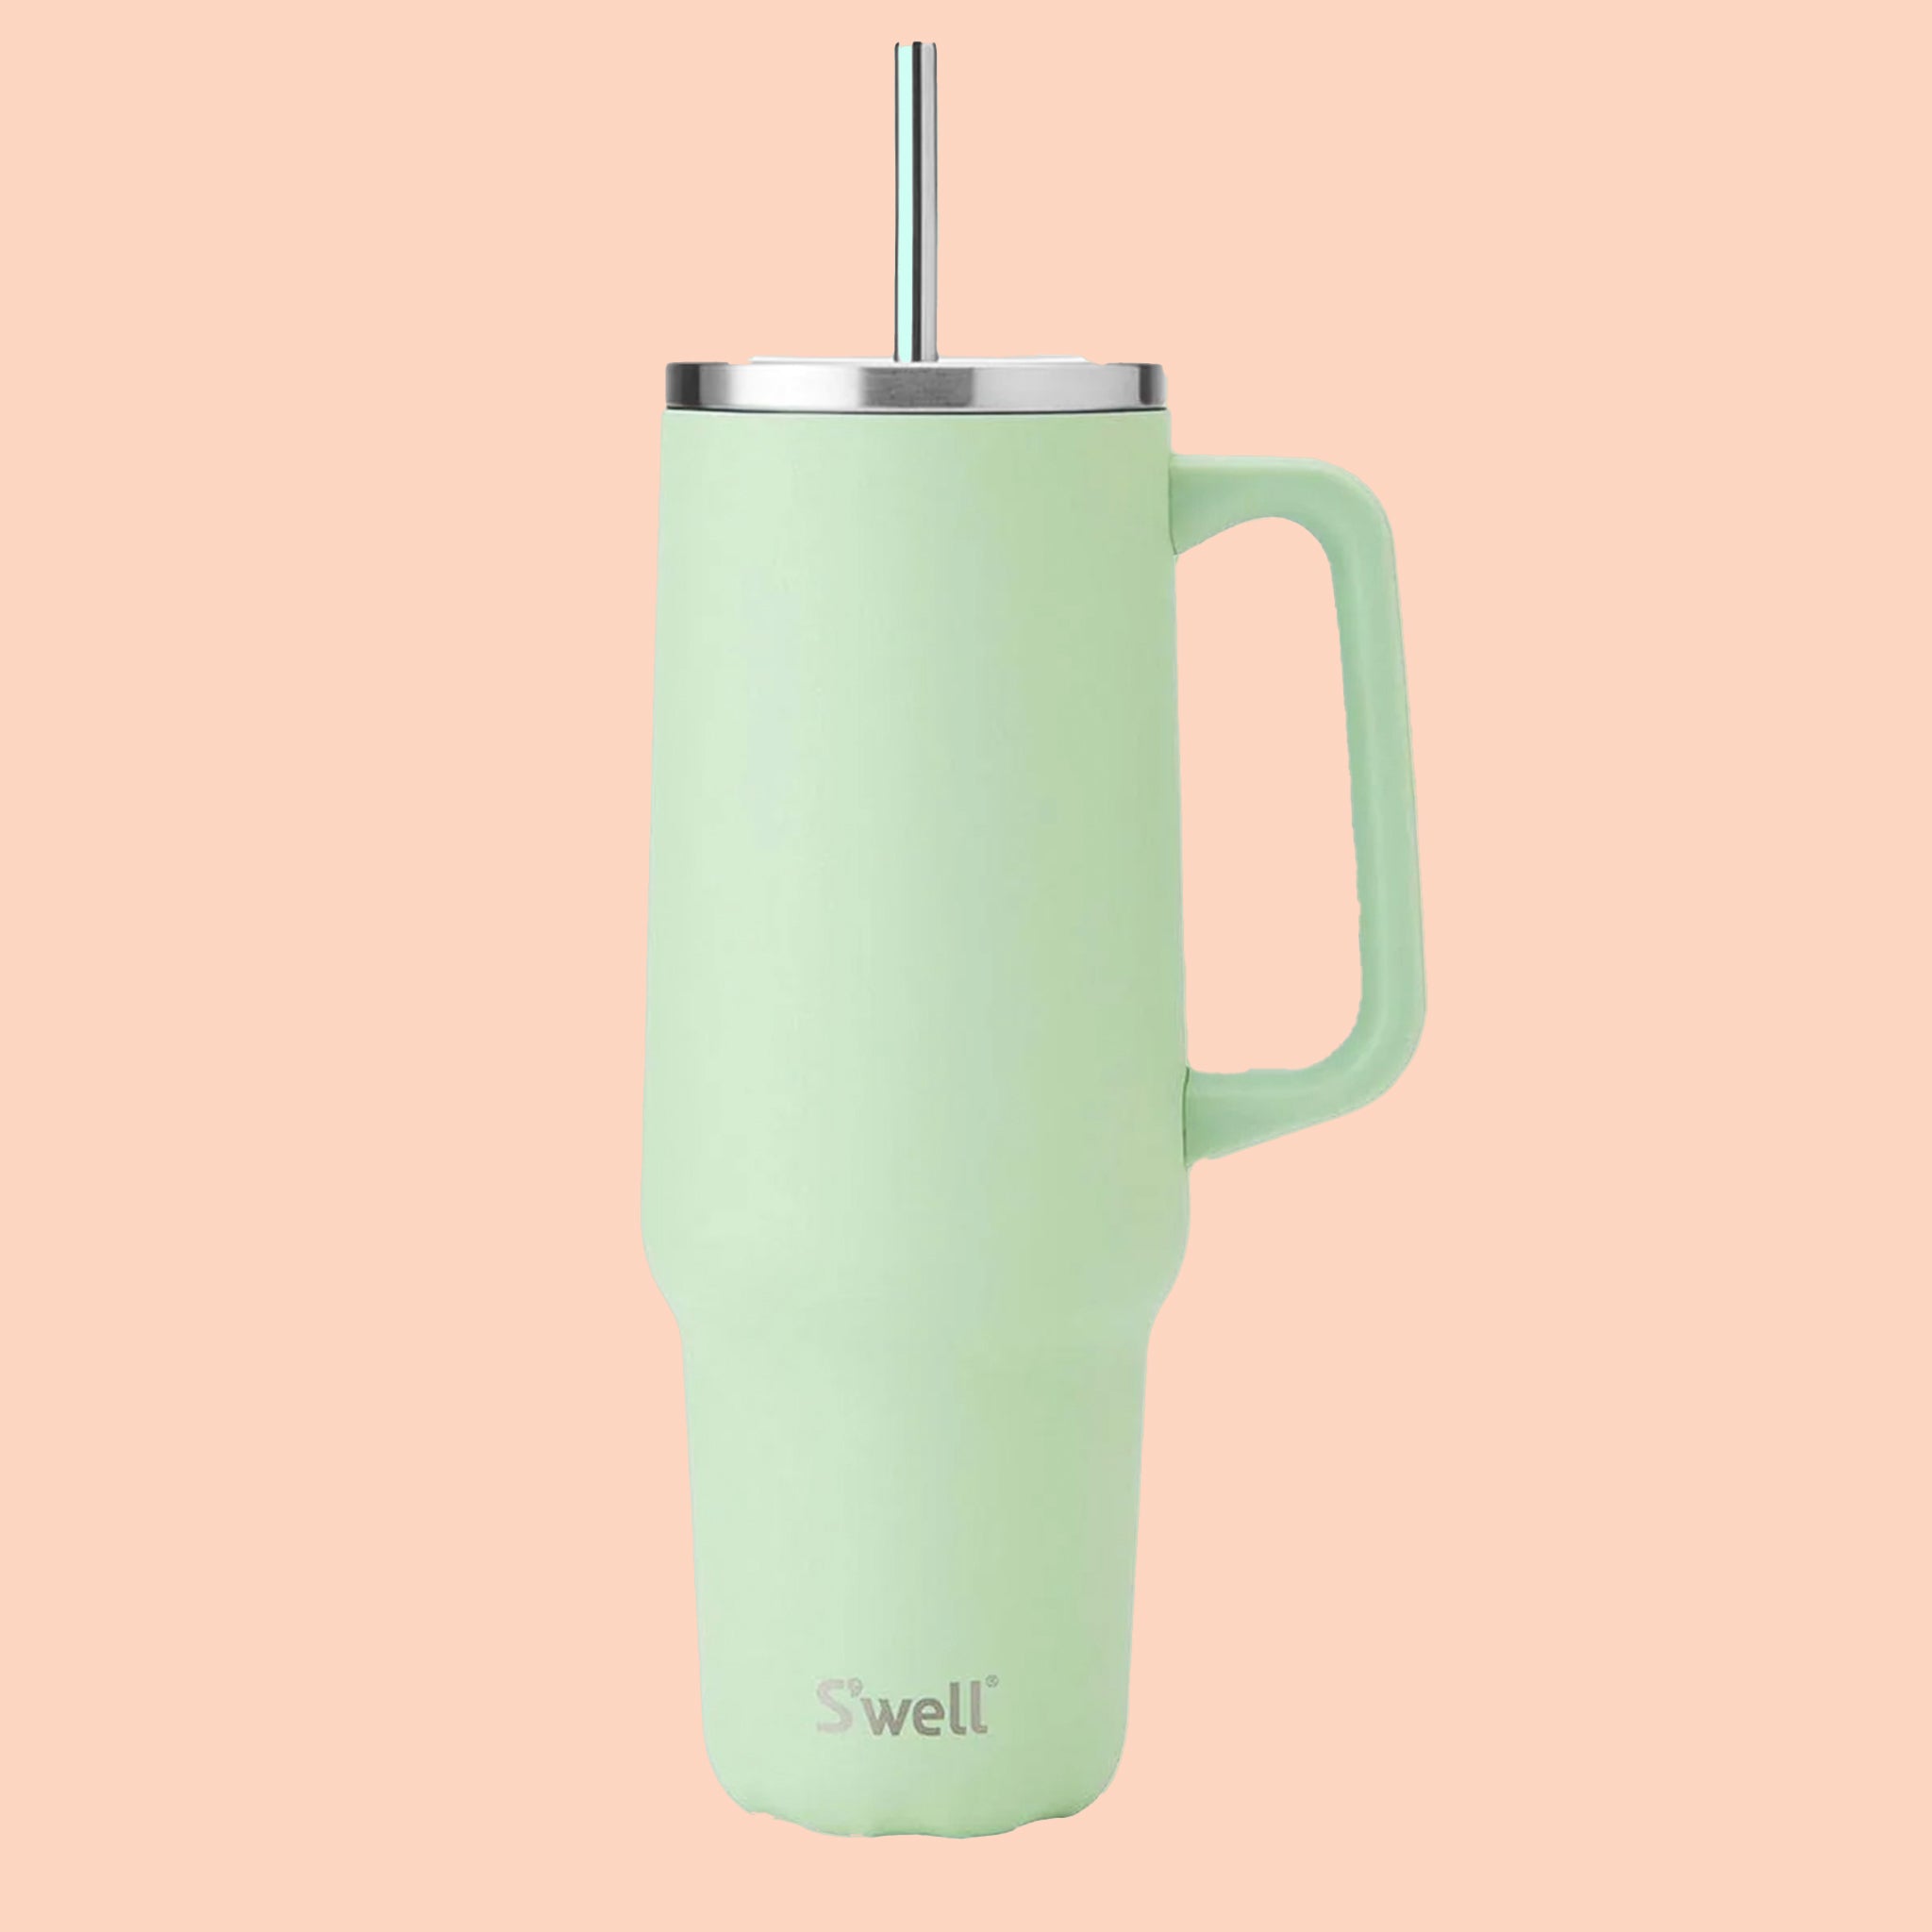 A light green tumbler with a silver lid and straw.